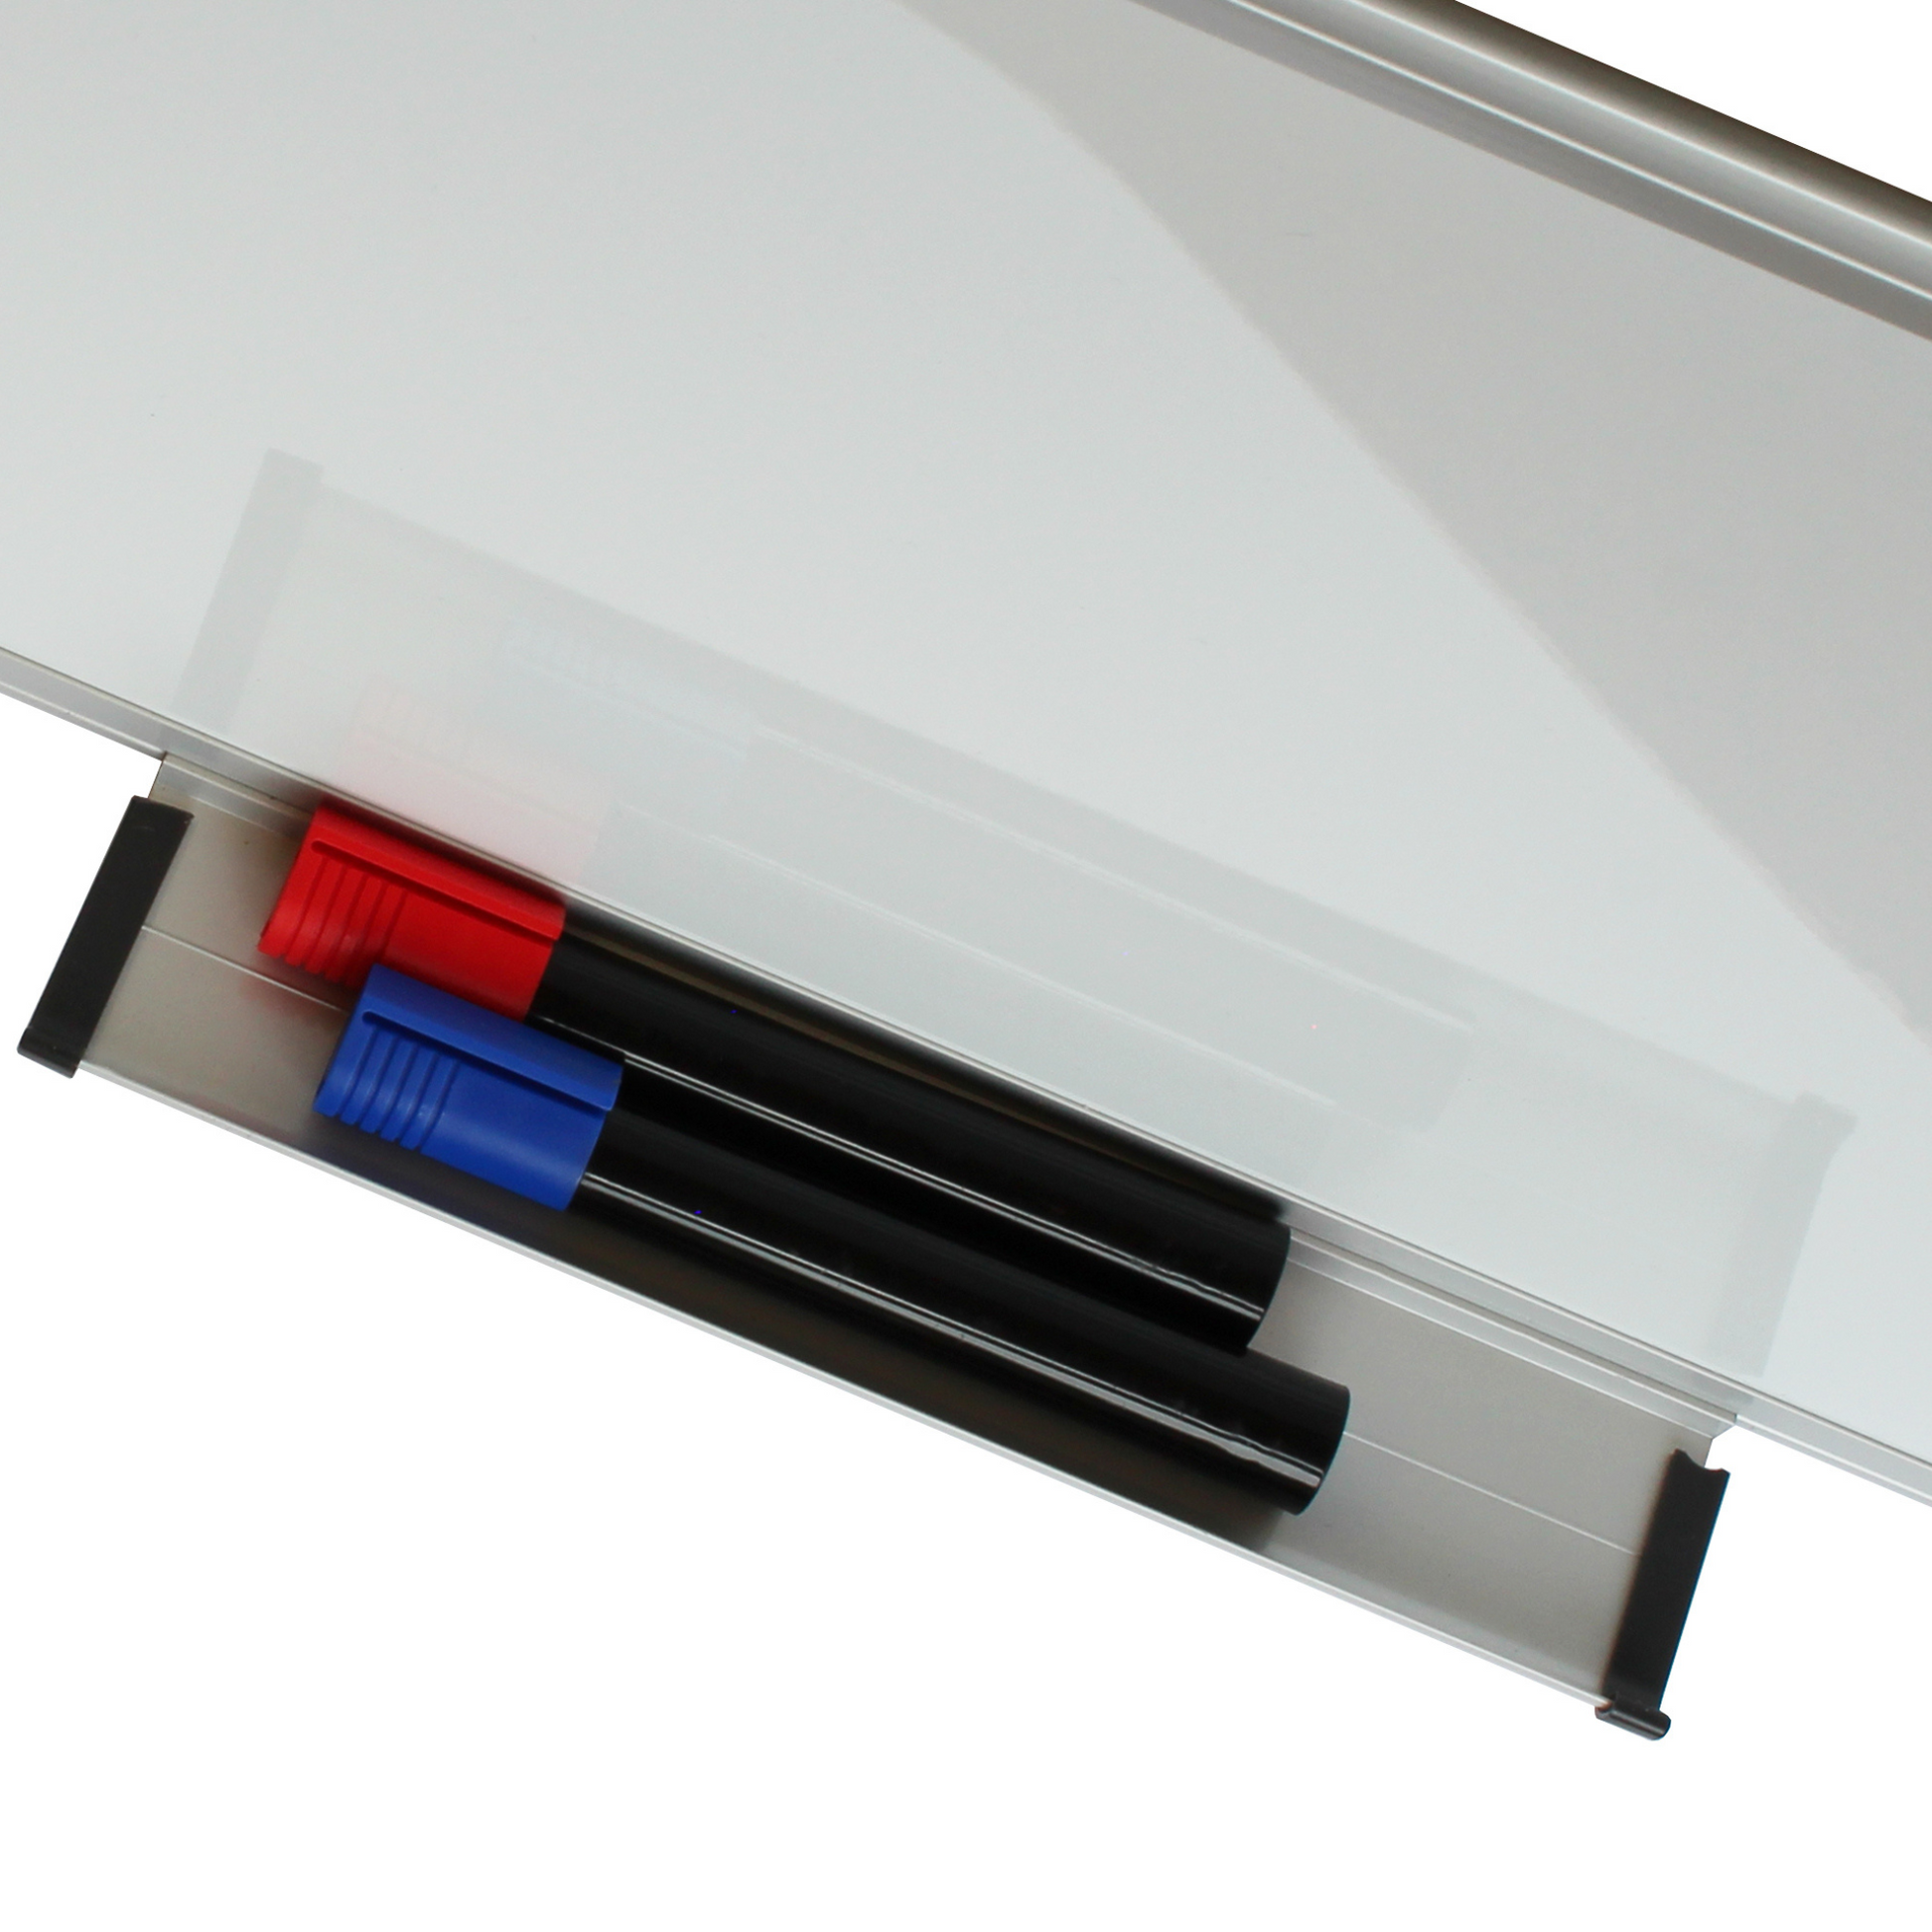 Whiteboard marker tray holding two markers with caps on, coloured red and blue (not included), against a white magnetic board with a metallic frame.